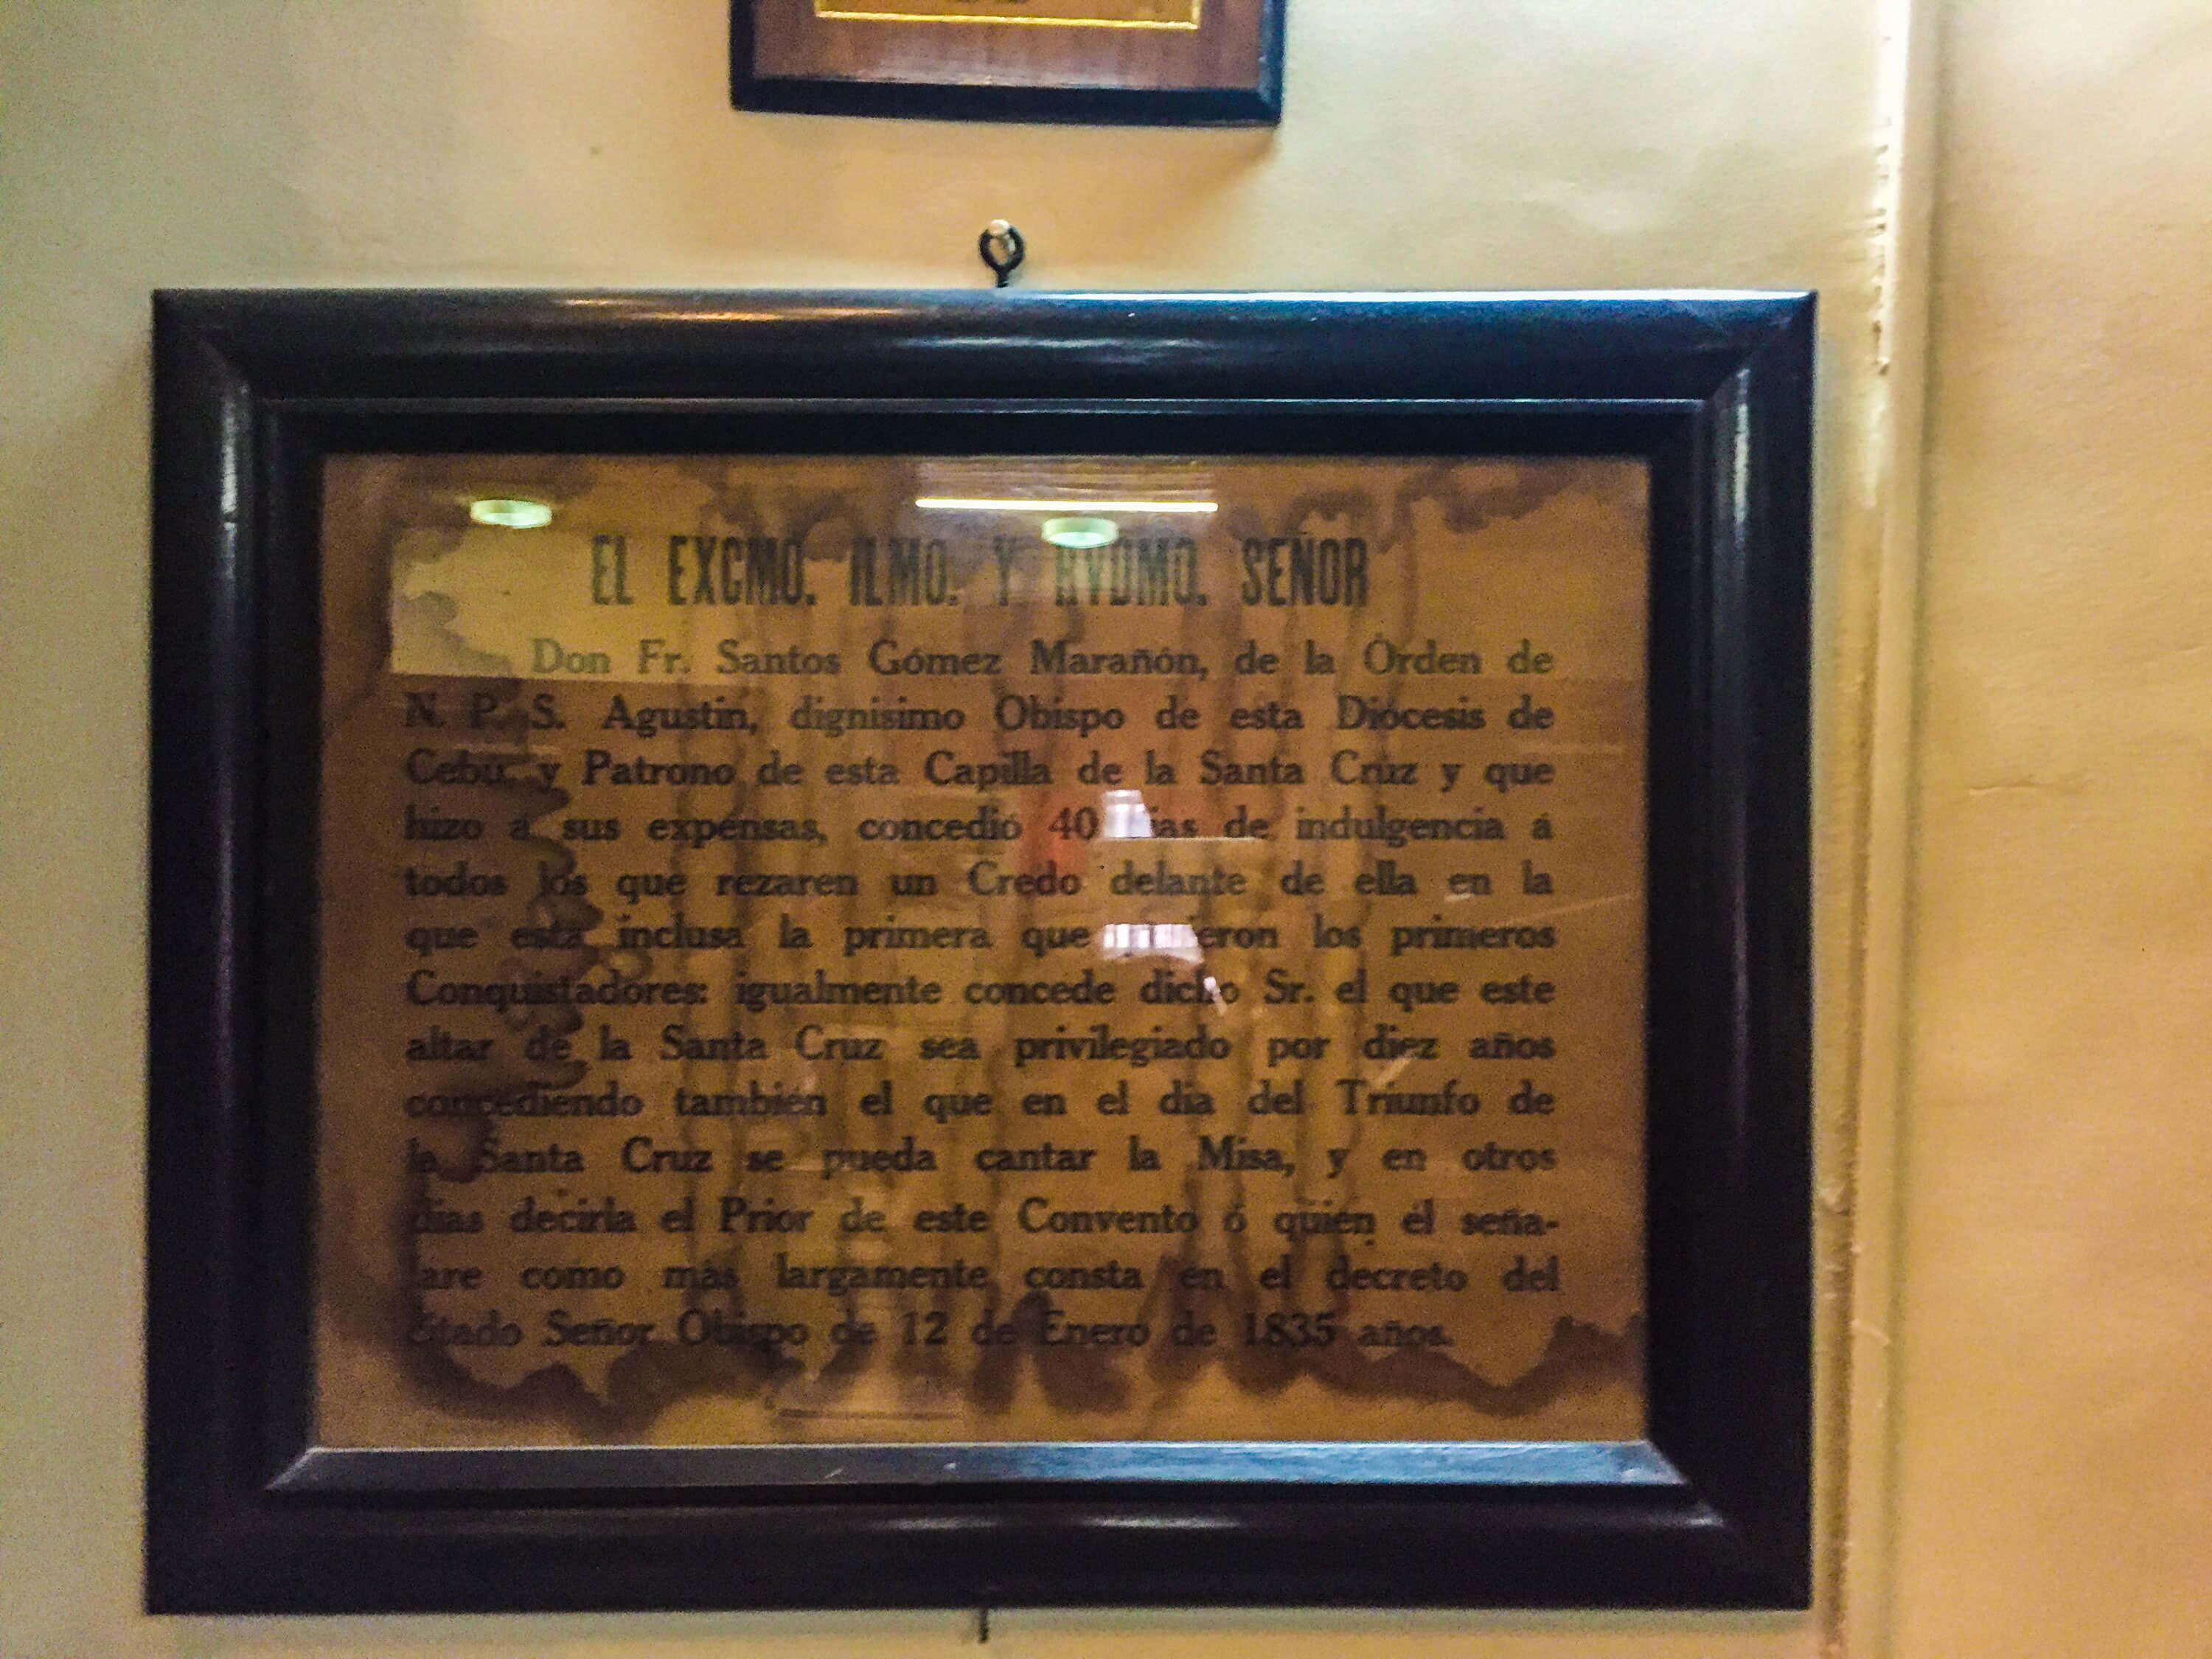 PLENARY INDULGENCE. This framed document found in the basilica library is the actual plenary indulgence granted by Cebu Bishop Santos Gomez Marañon for the Magellan’s Cross.